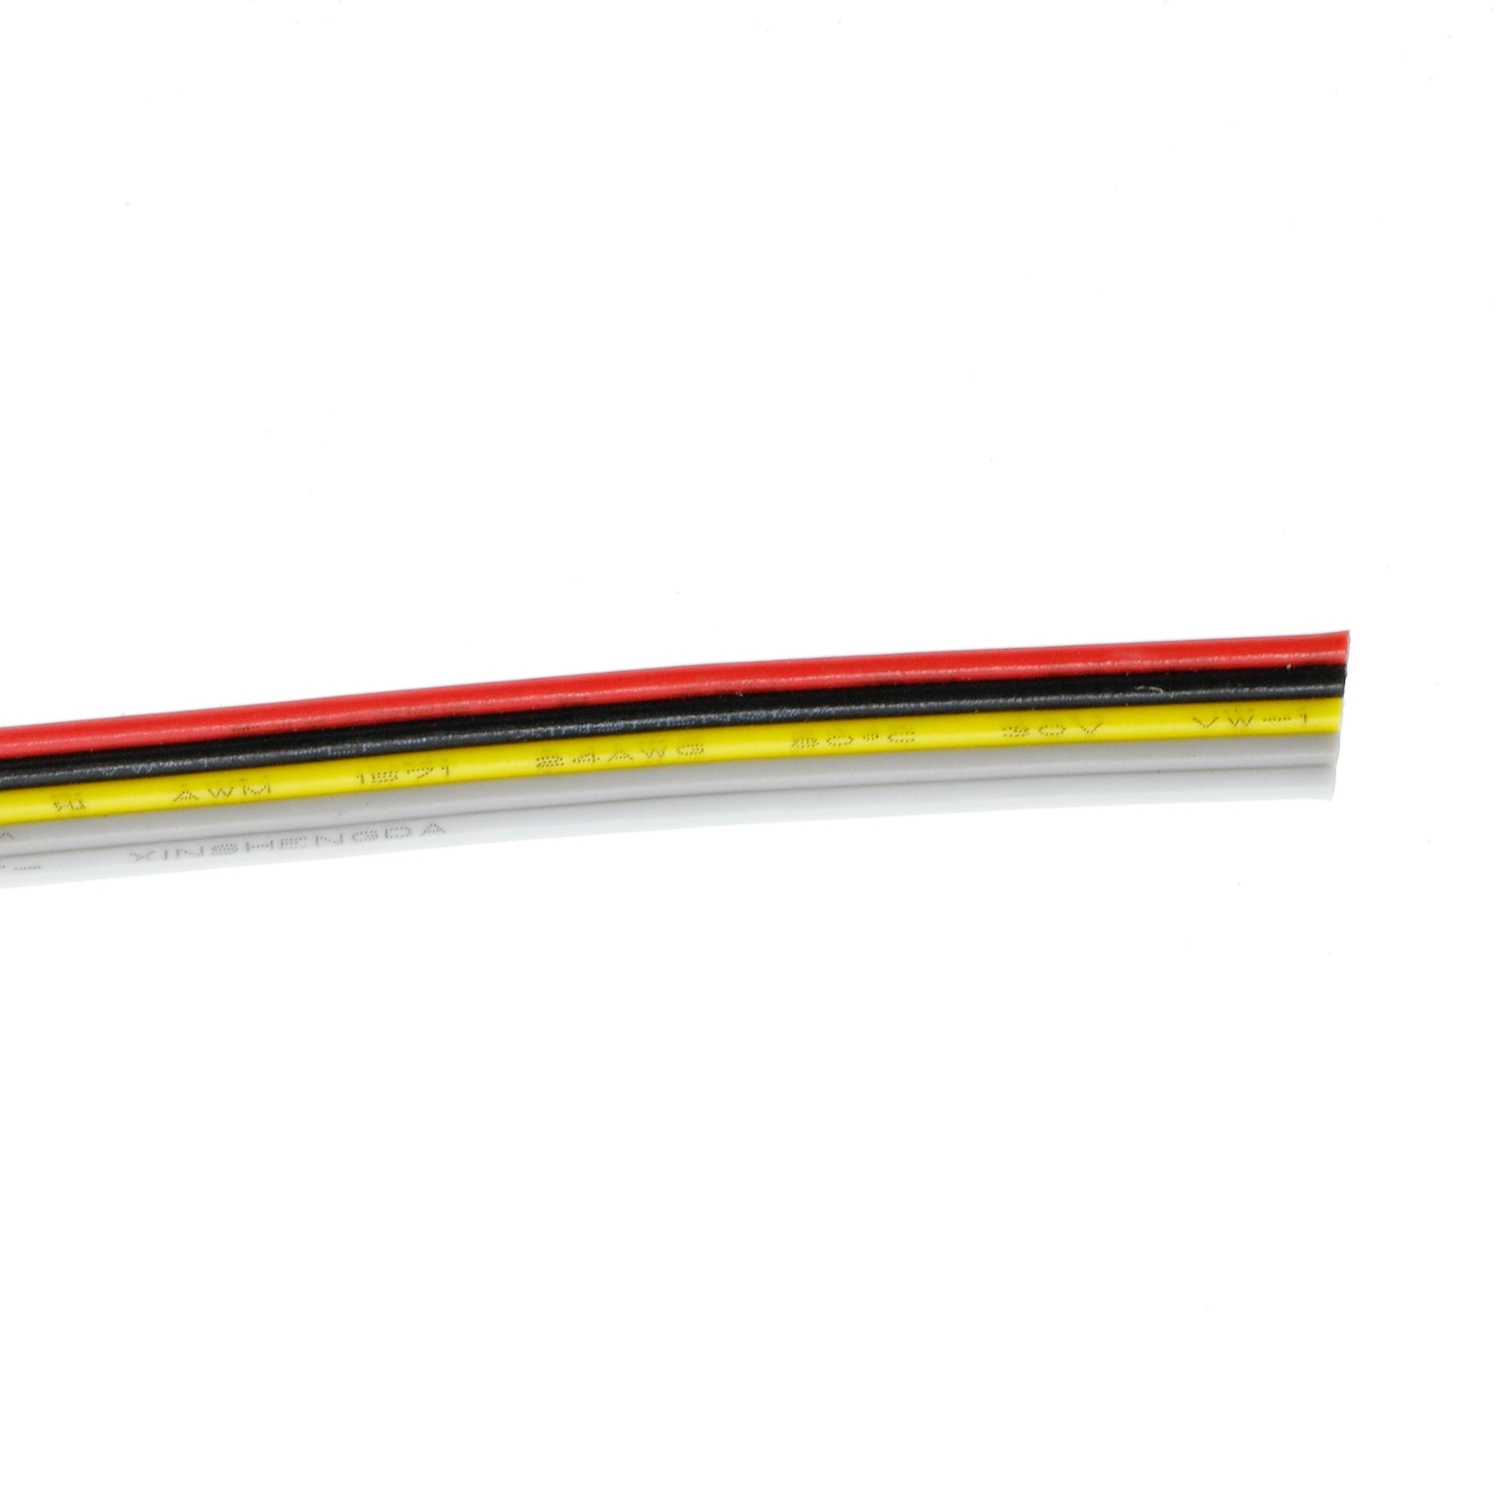 Flat Cable PVC OEM Ribbon Cable for Computer Internal Wiring 